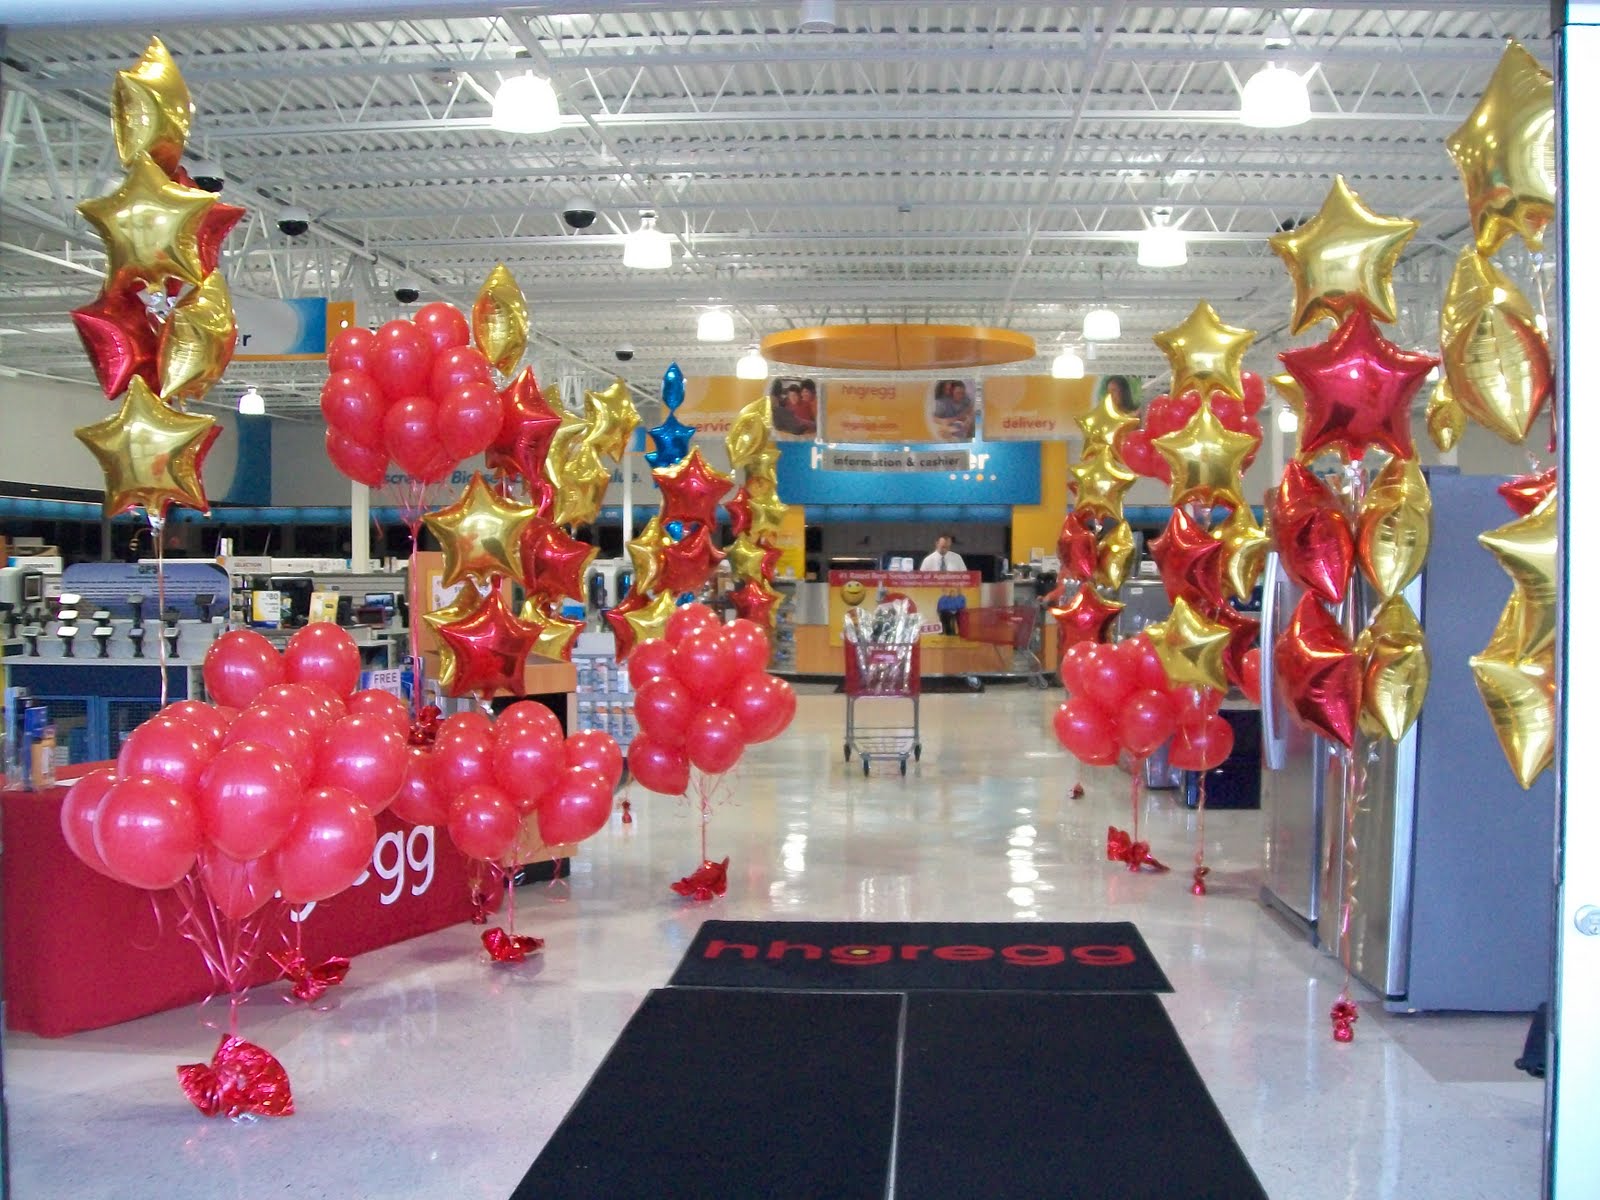 Party People Event Decorating Company: Grand Opening Celebration